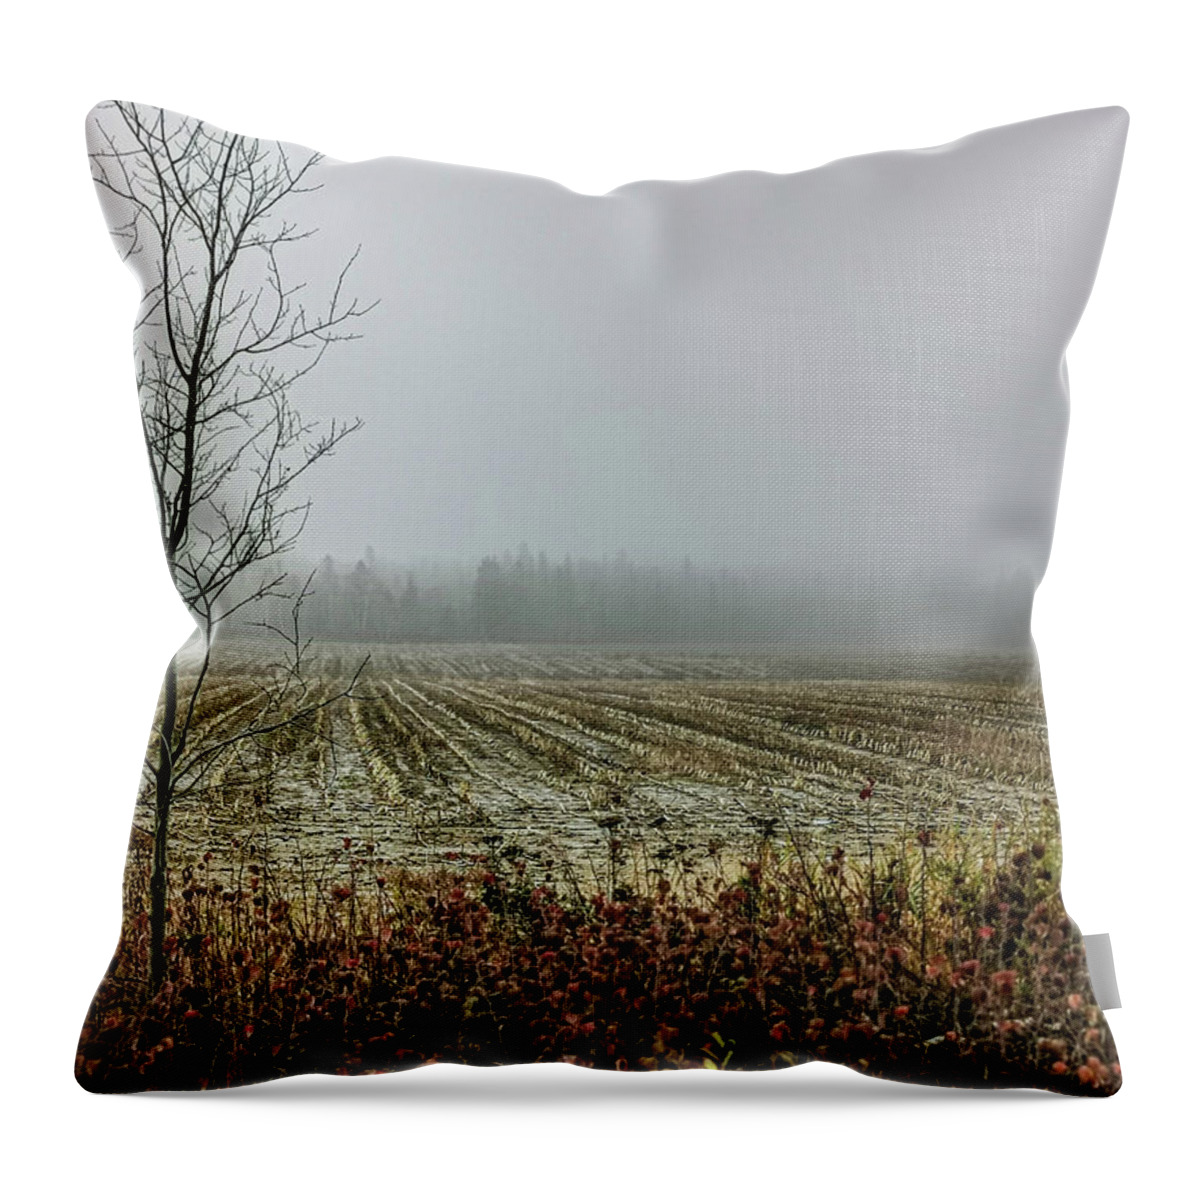 Field Throw Pillow featuring the photograph Autumn Scenery by Daniel Martin